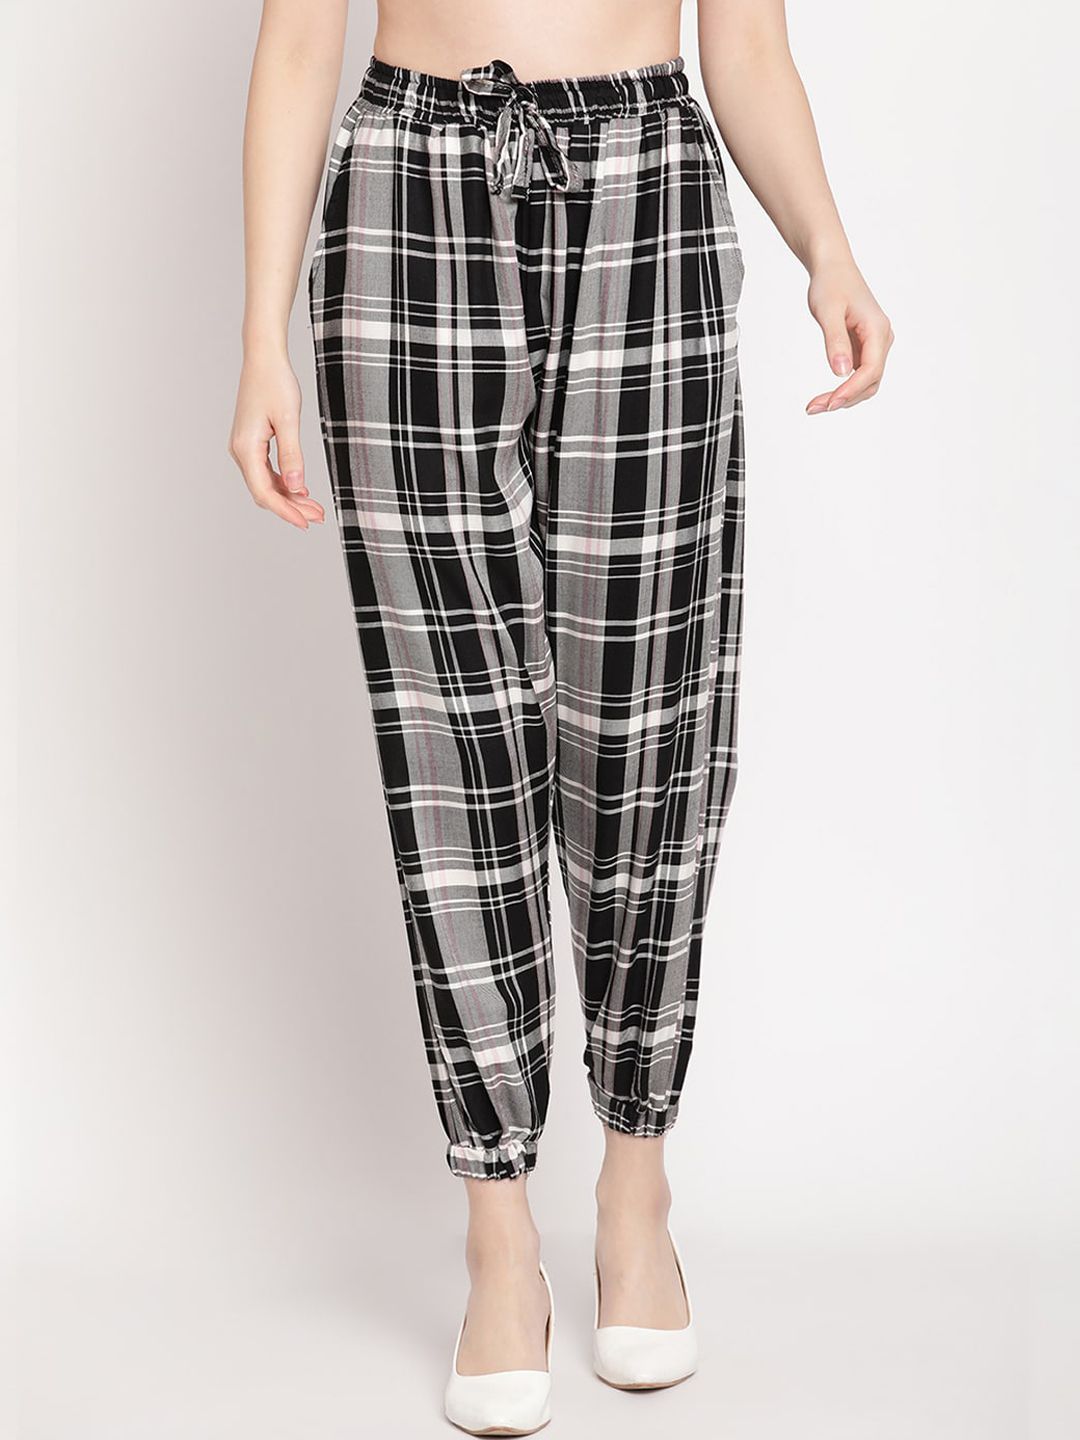 TAG 7 Women Black Checked Smart Regular-Fit Joggers Price in India